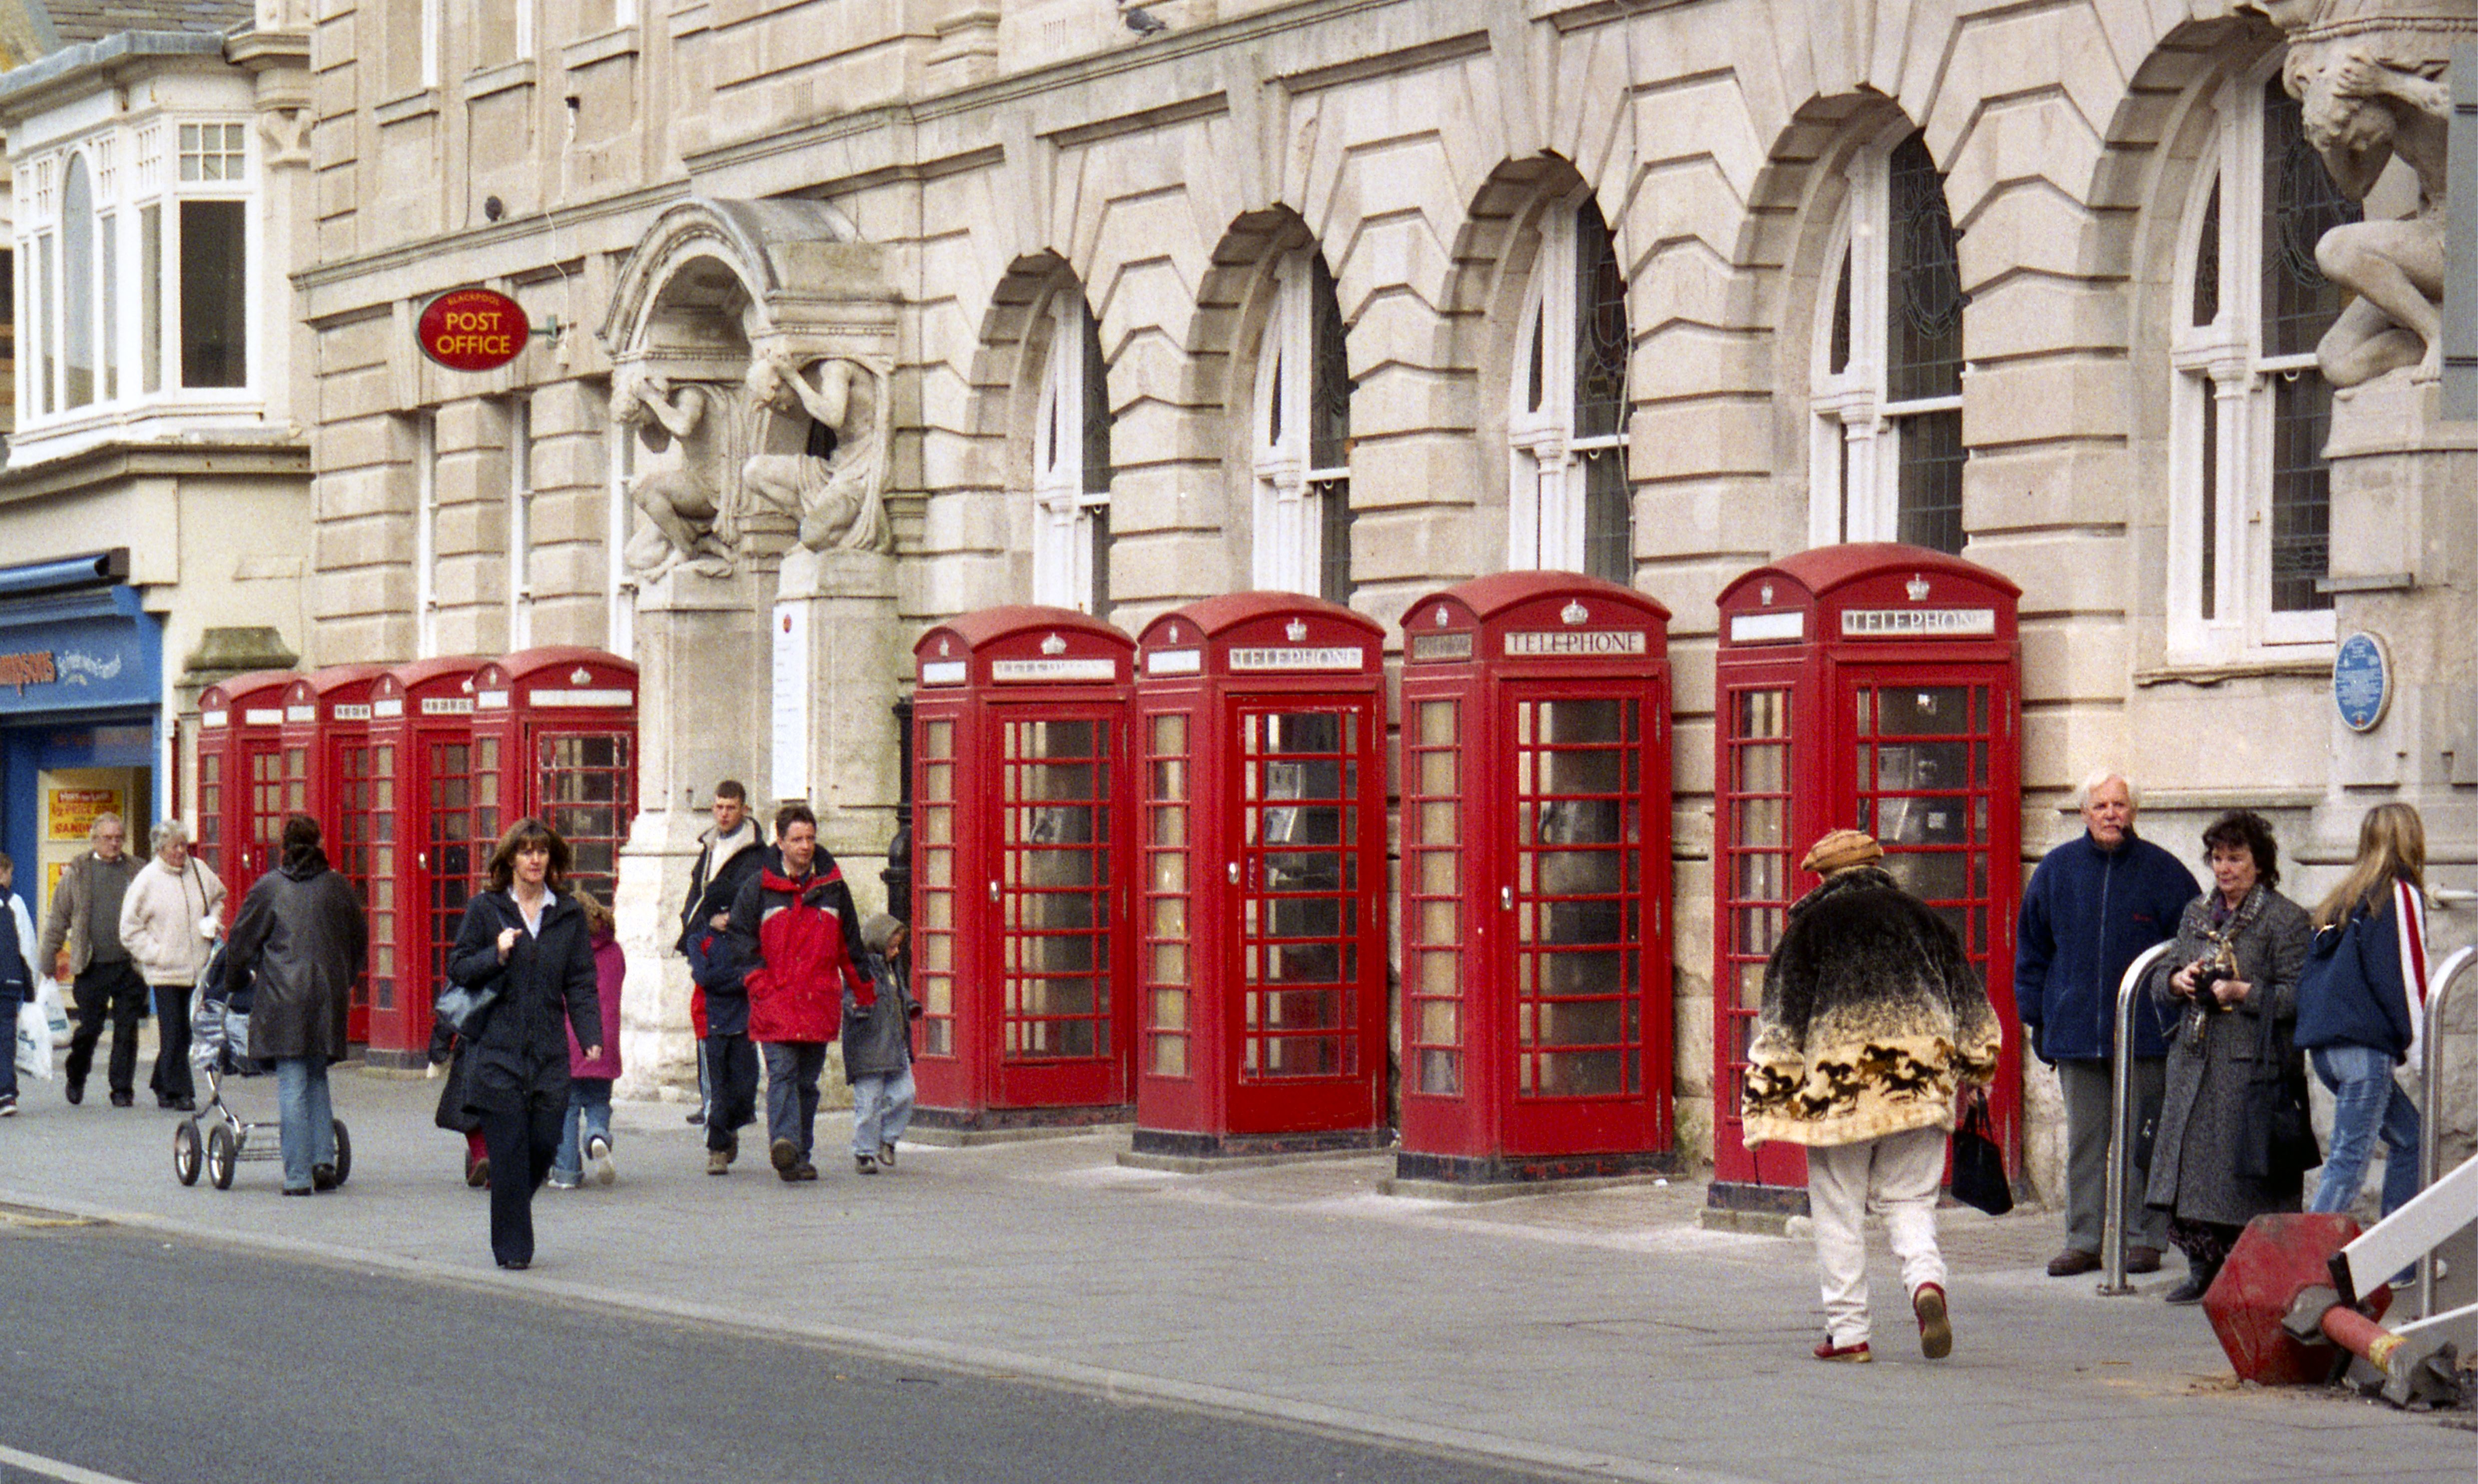 Group of eight K6 telephone kiosks with people walking past them